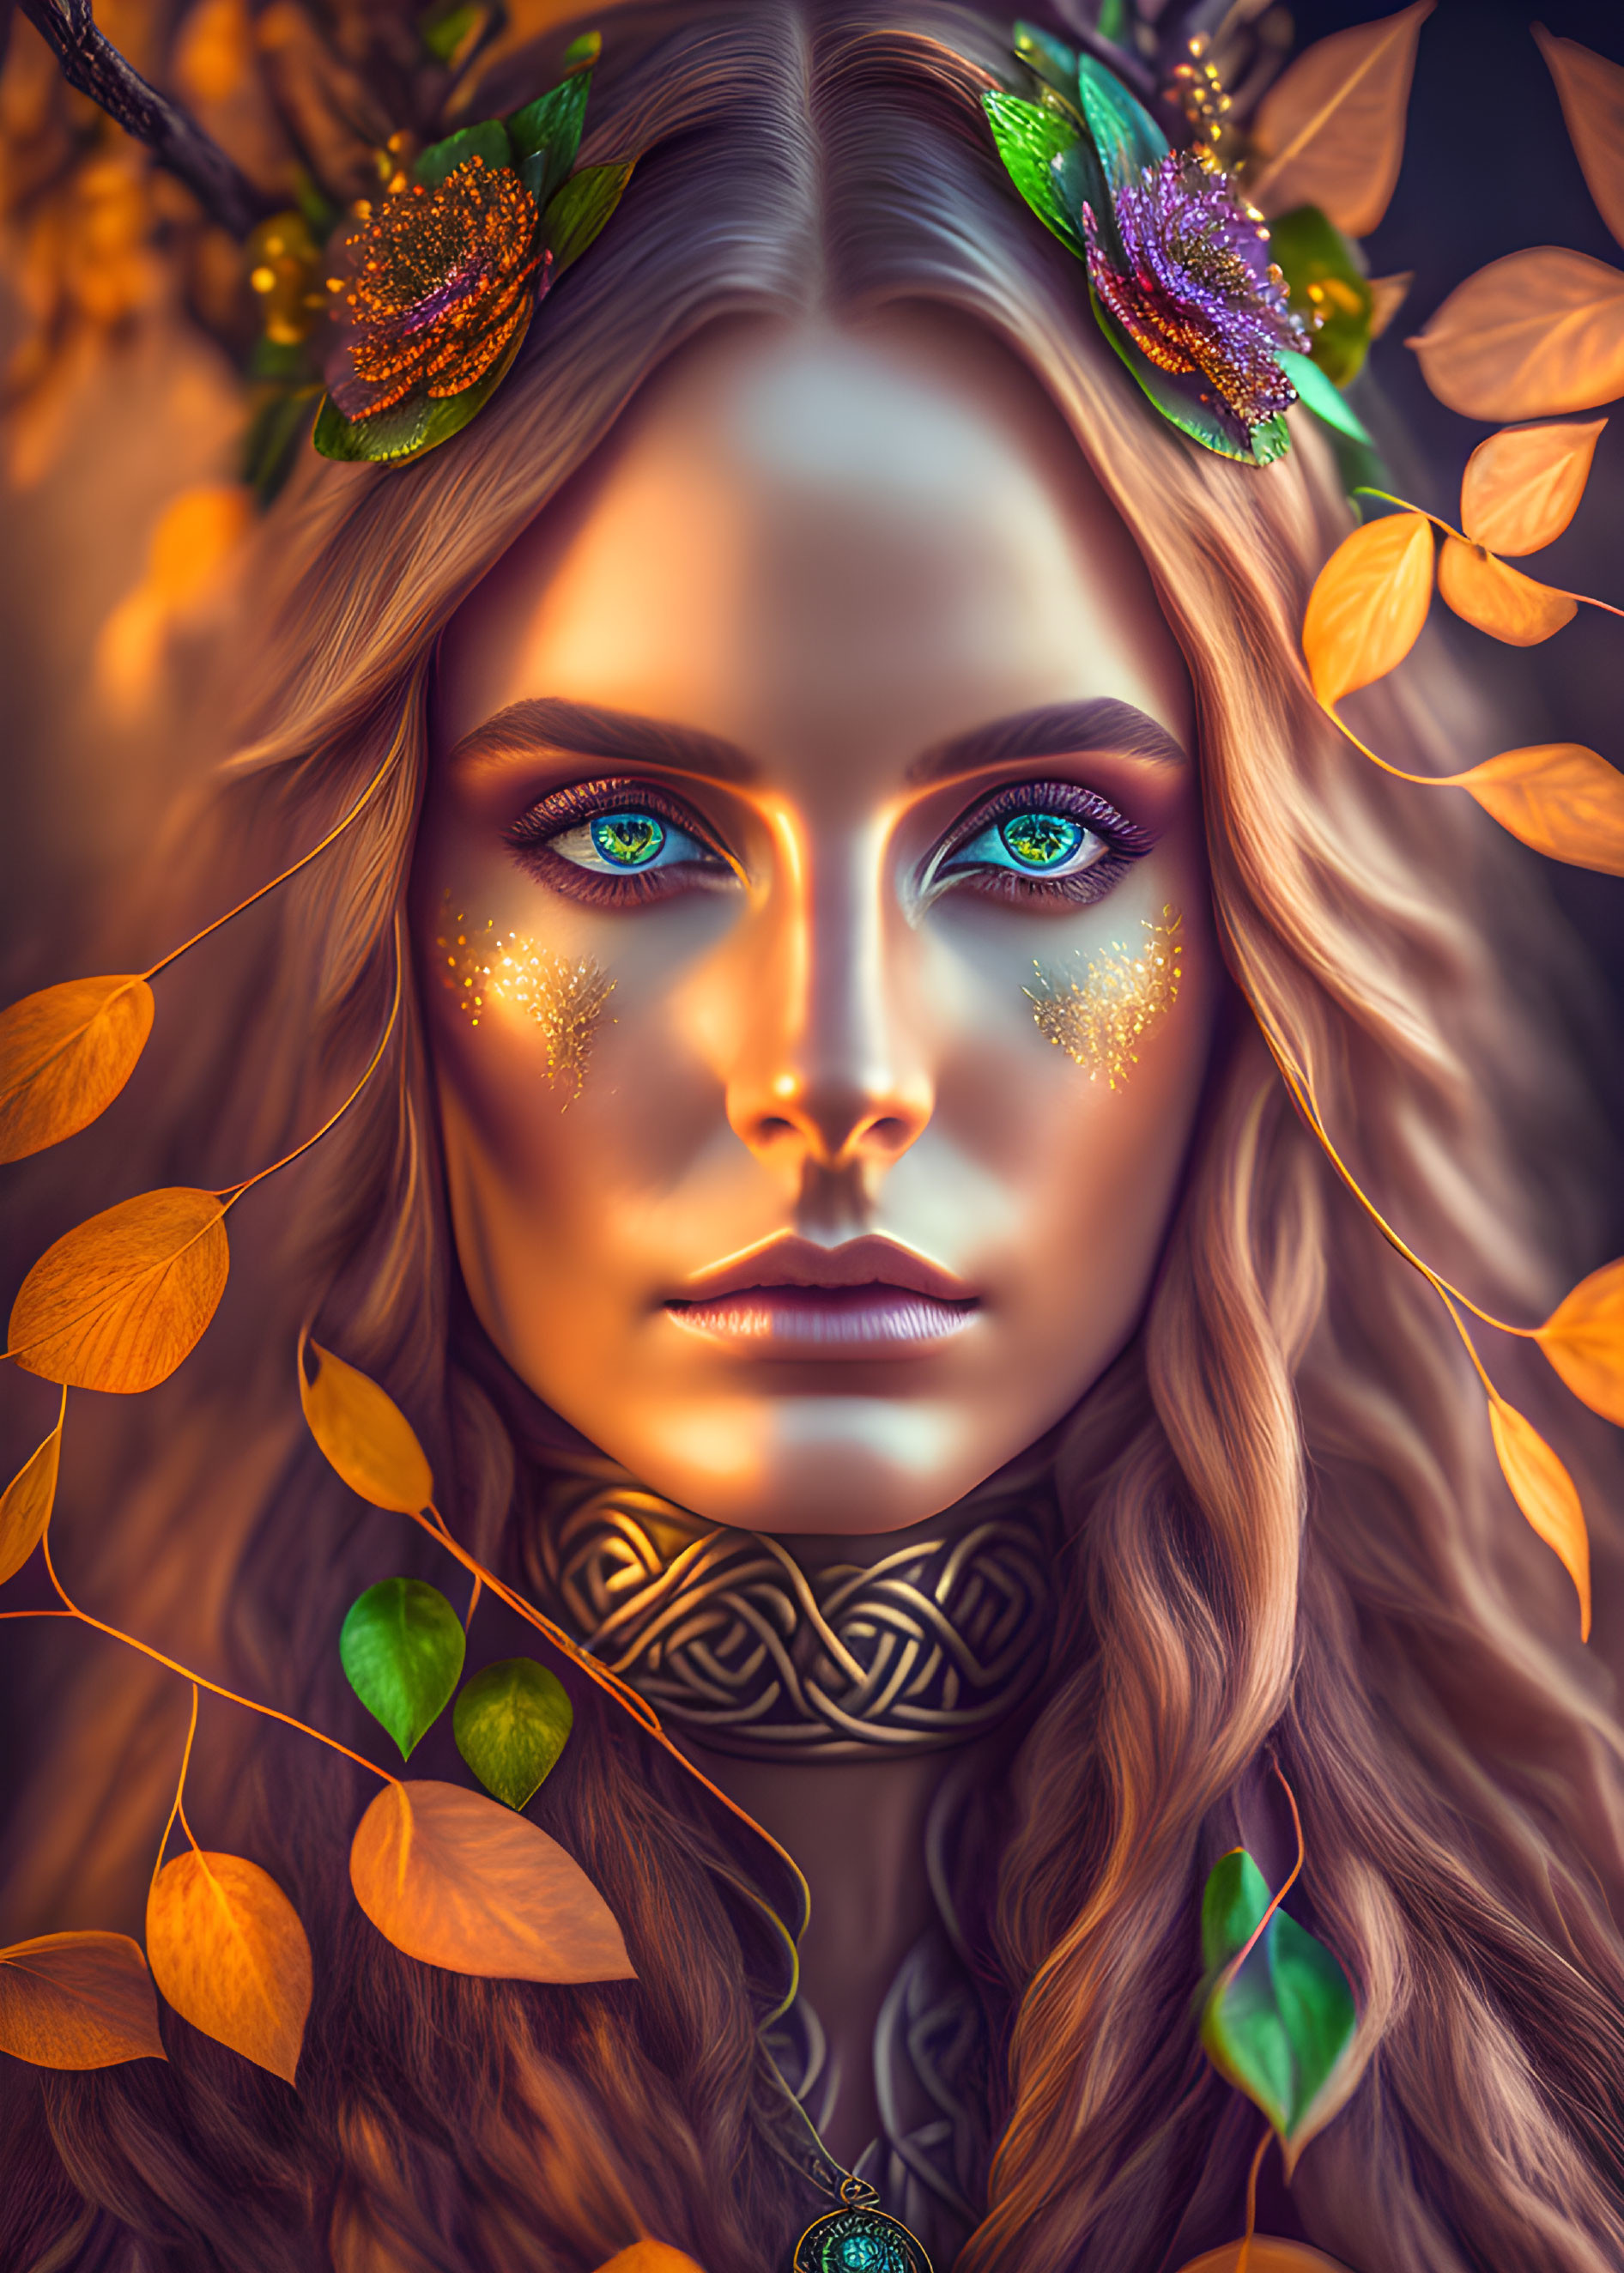 Celtic Witch focusing on nature